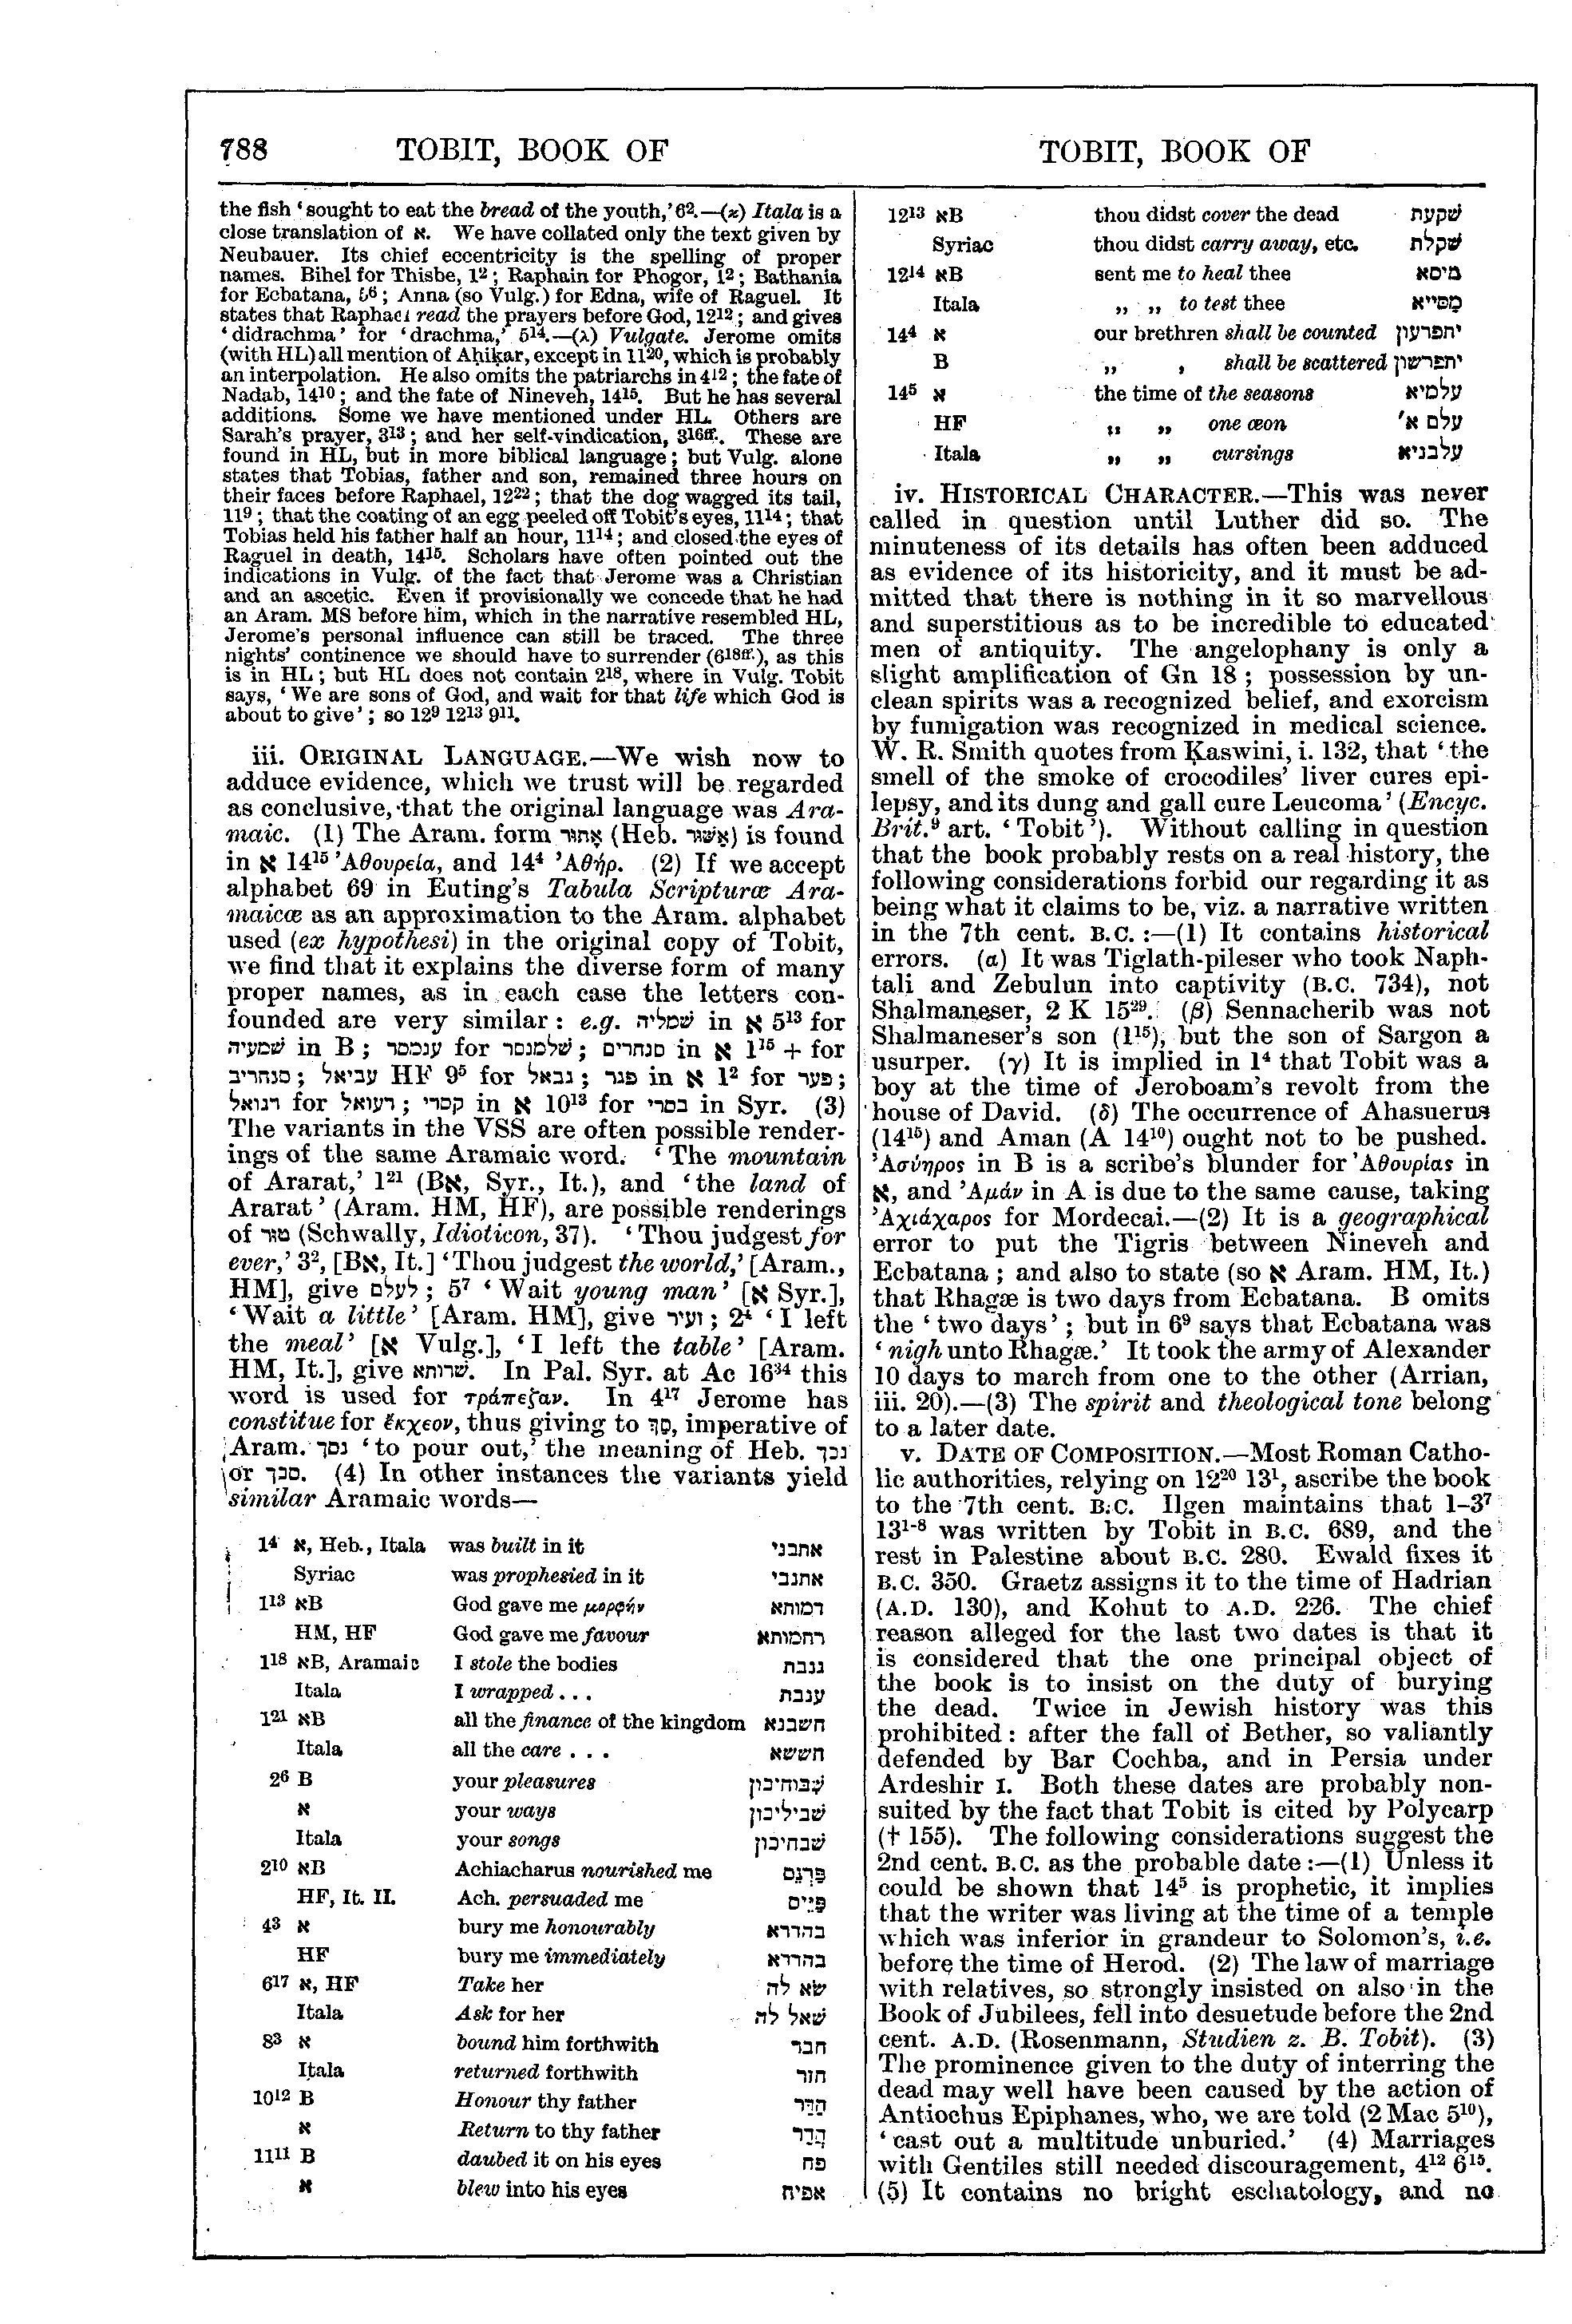 Image of page 788